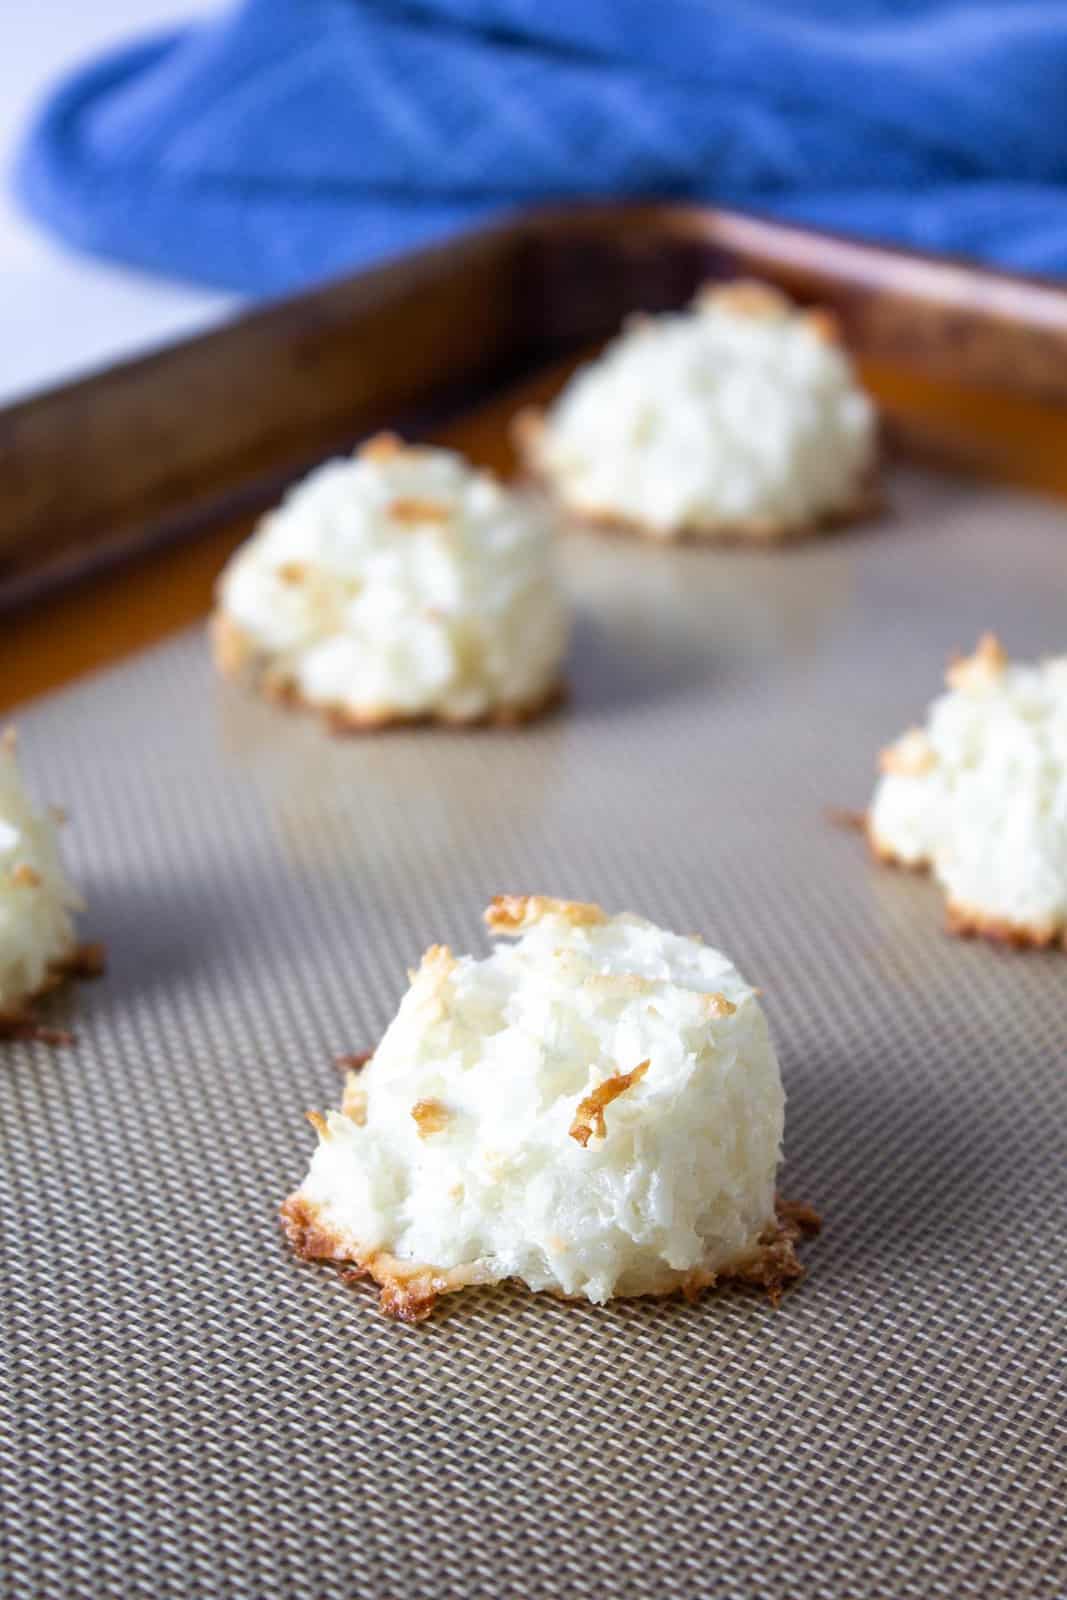 Baked coconut cookies on a baking sheet.